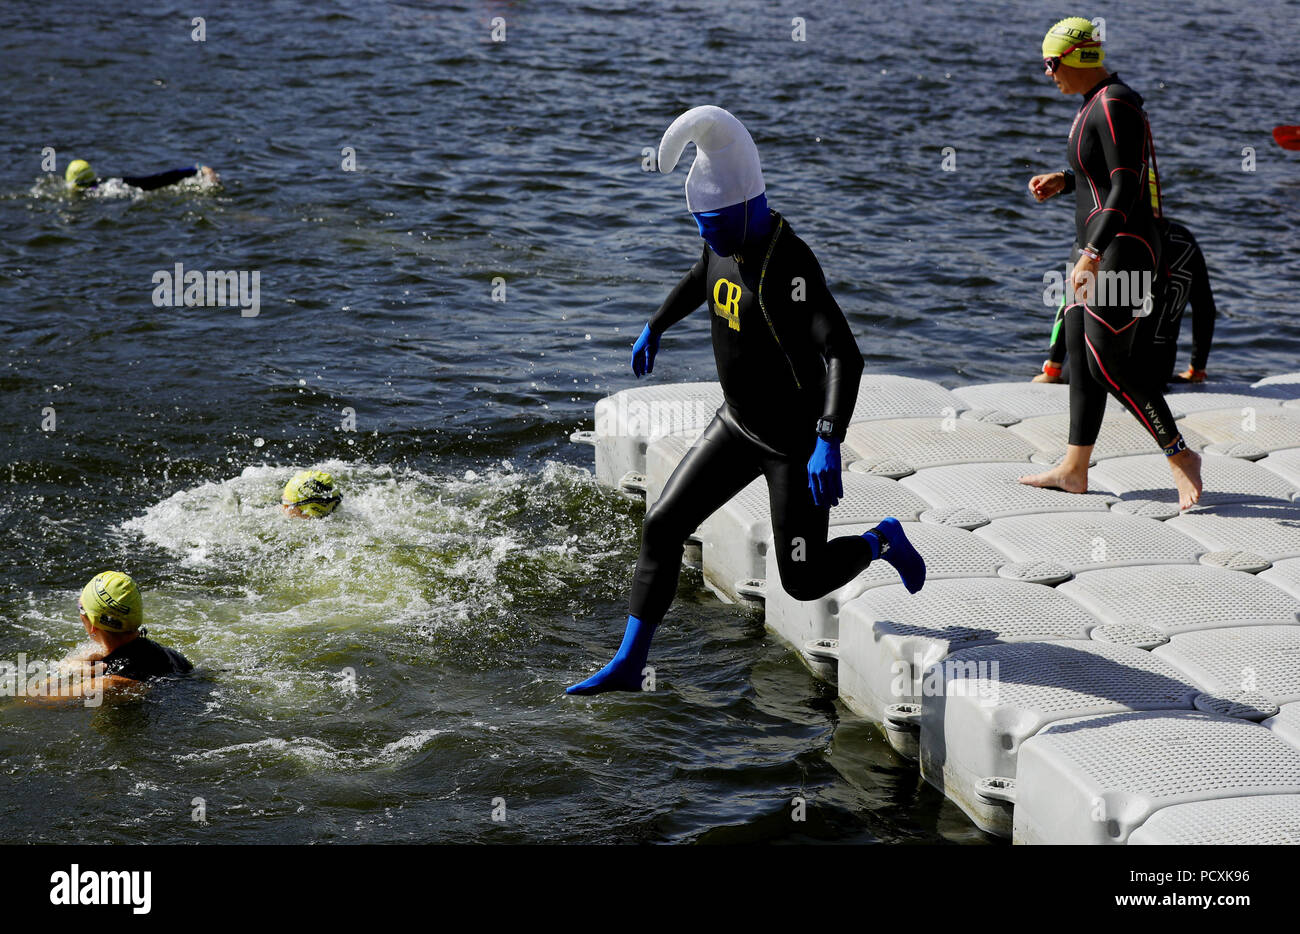 A competitor dressed as a smurf cartoon character in the Weekend Warrior wave in the AJ Bell London Triathlon at the Royal Victoria Docks in east London. Stock Photo